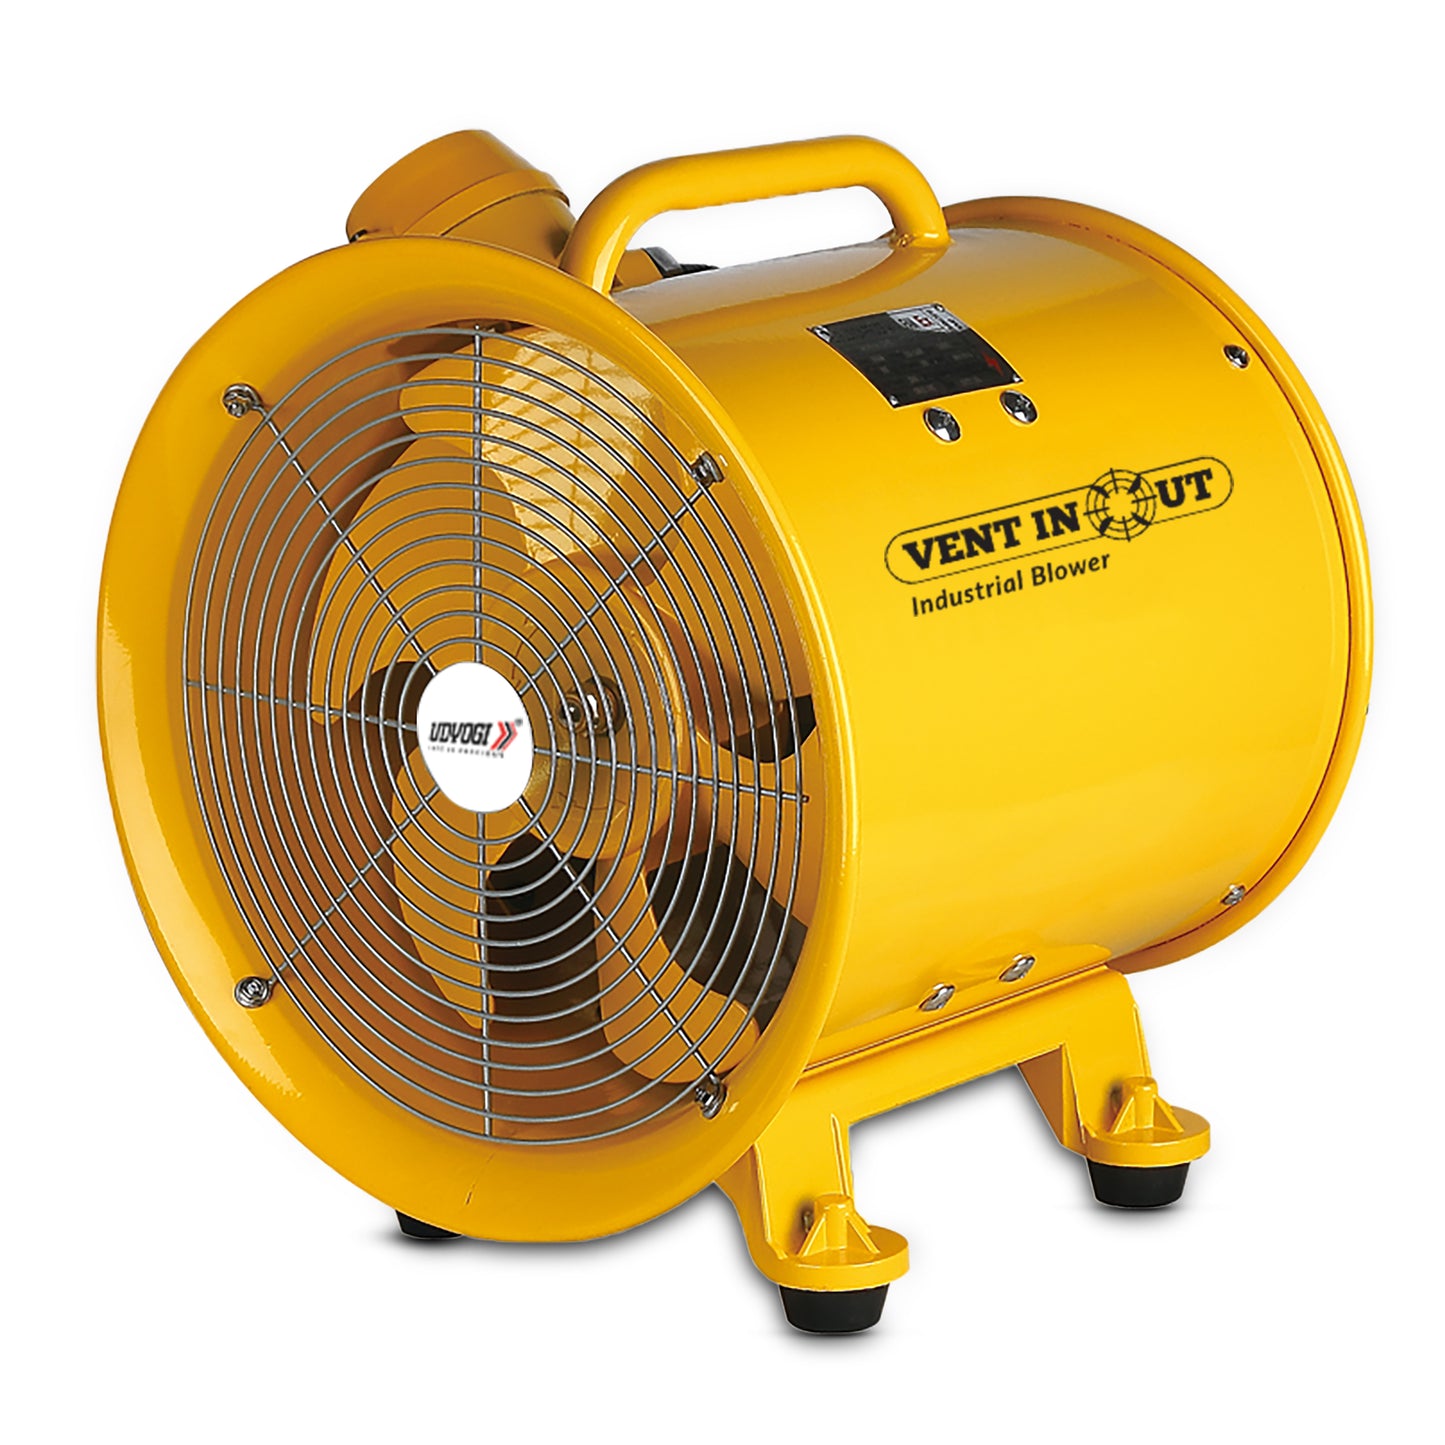 Udyogi Industrial Blower 12'' Vent in out BTF 30 300mm